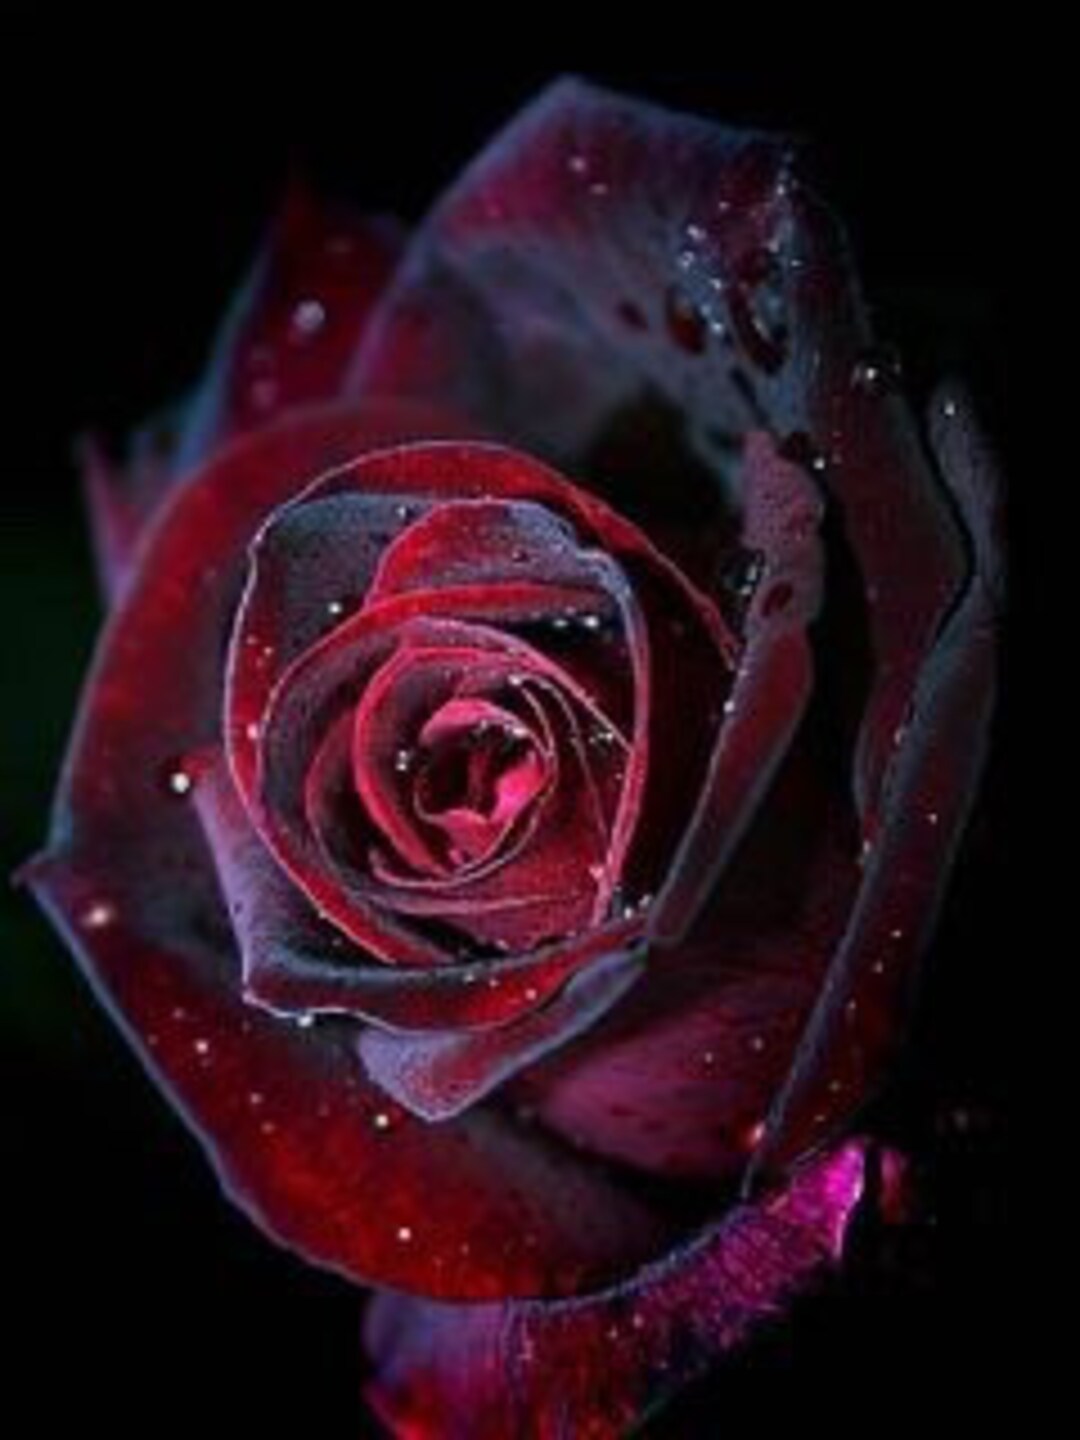 Red and Black Rose Seeds - Etsy